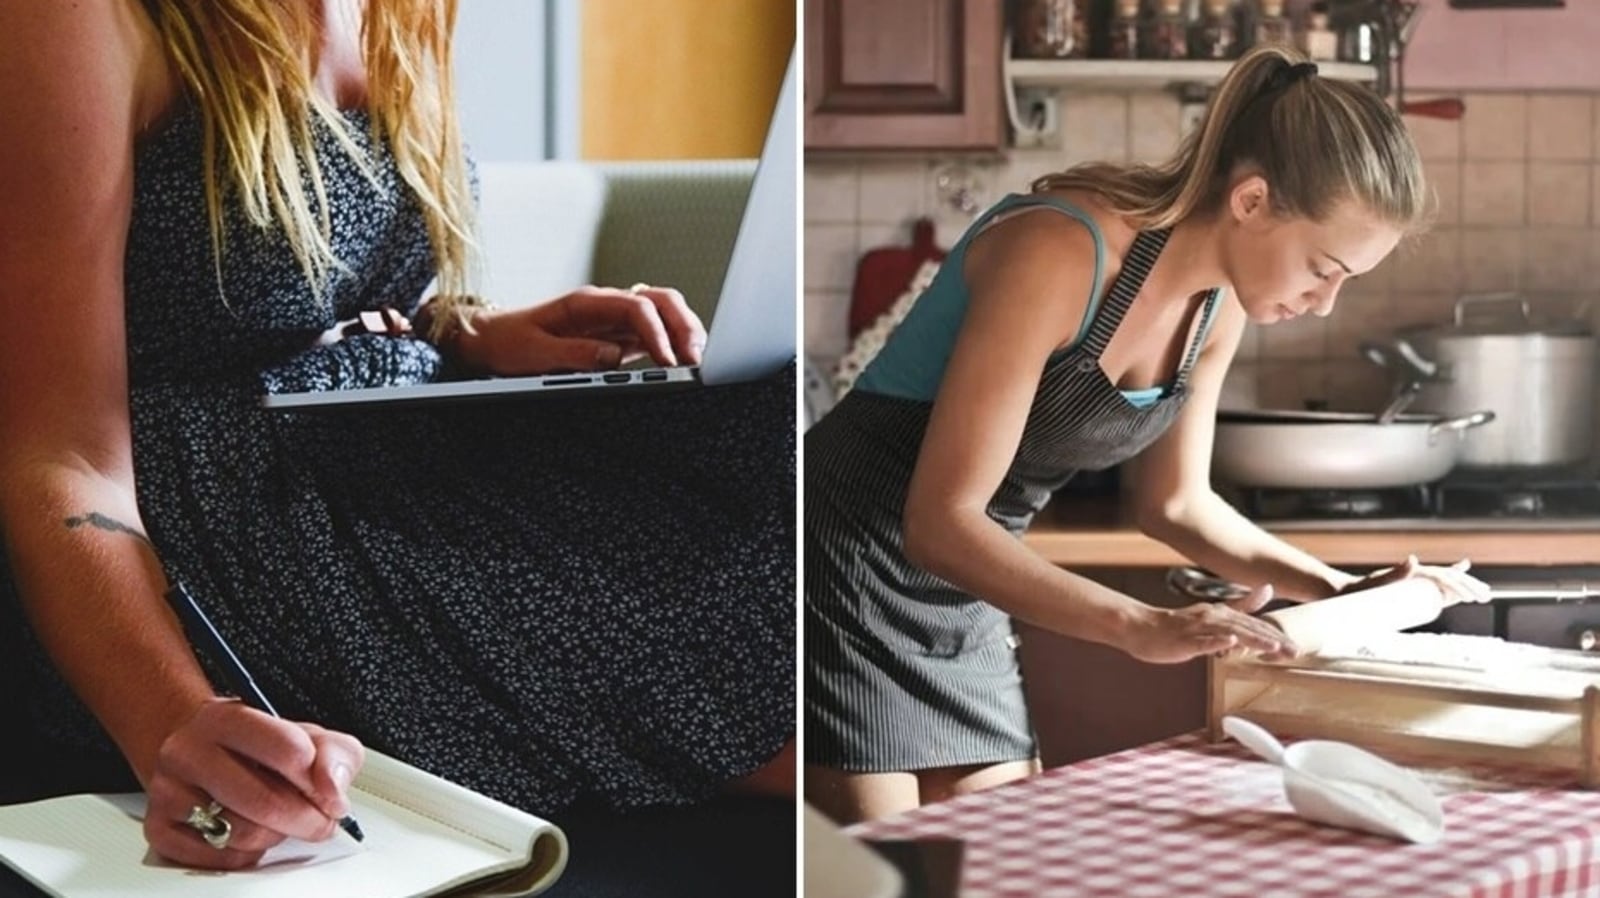 Working woman vs housewife; is one more stressed than the other? Experts answer Health